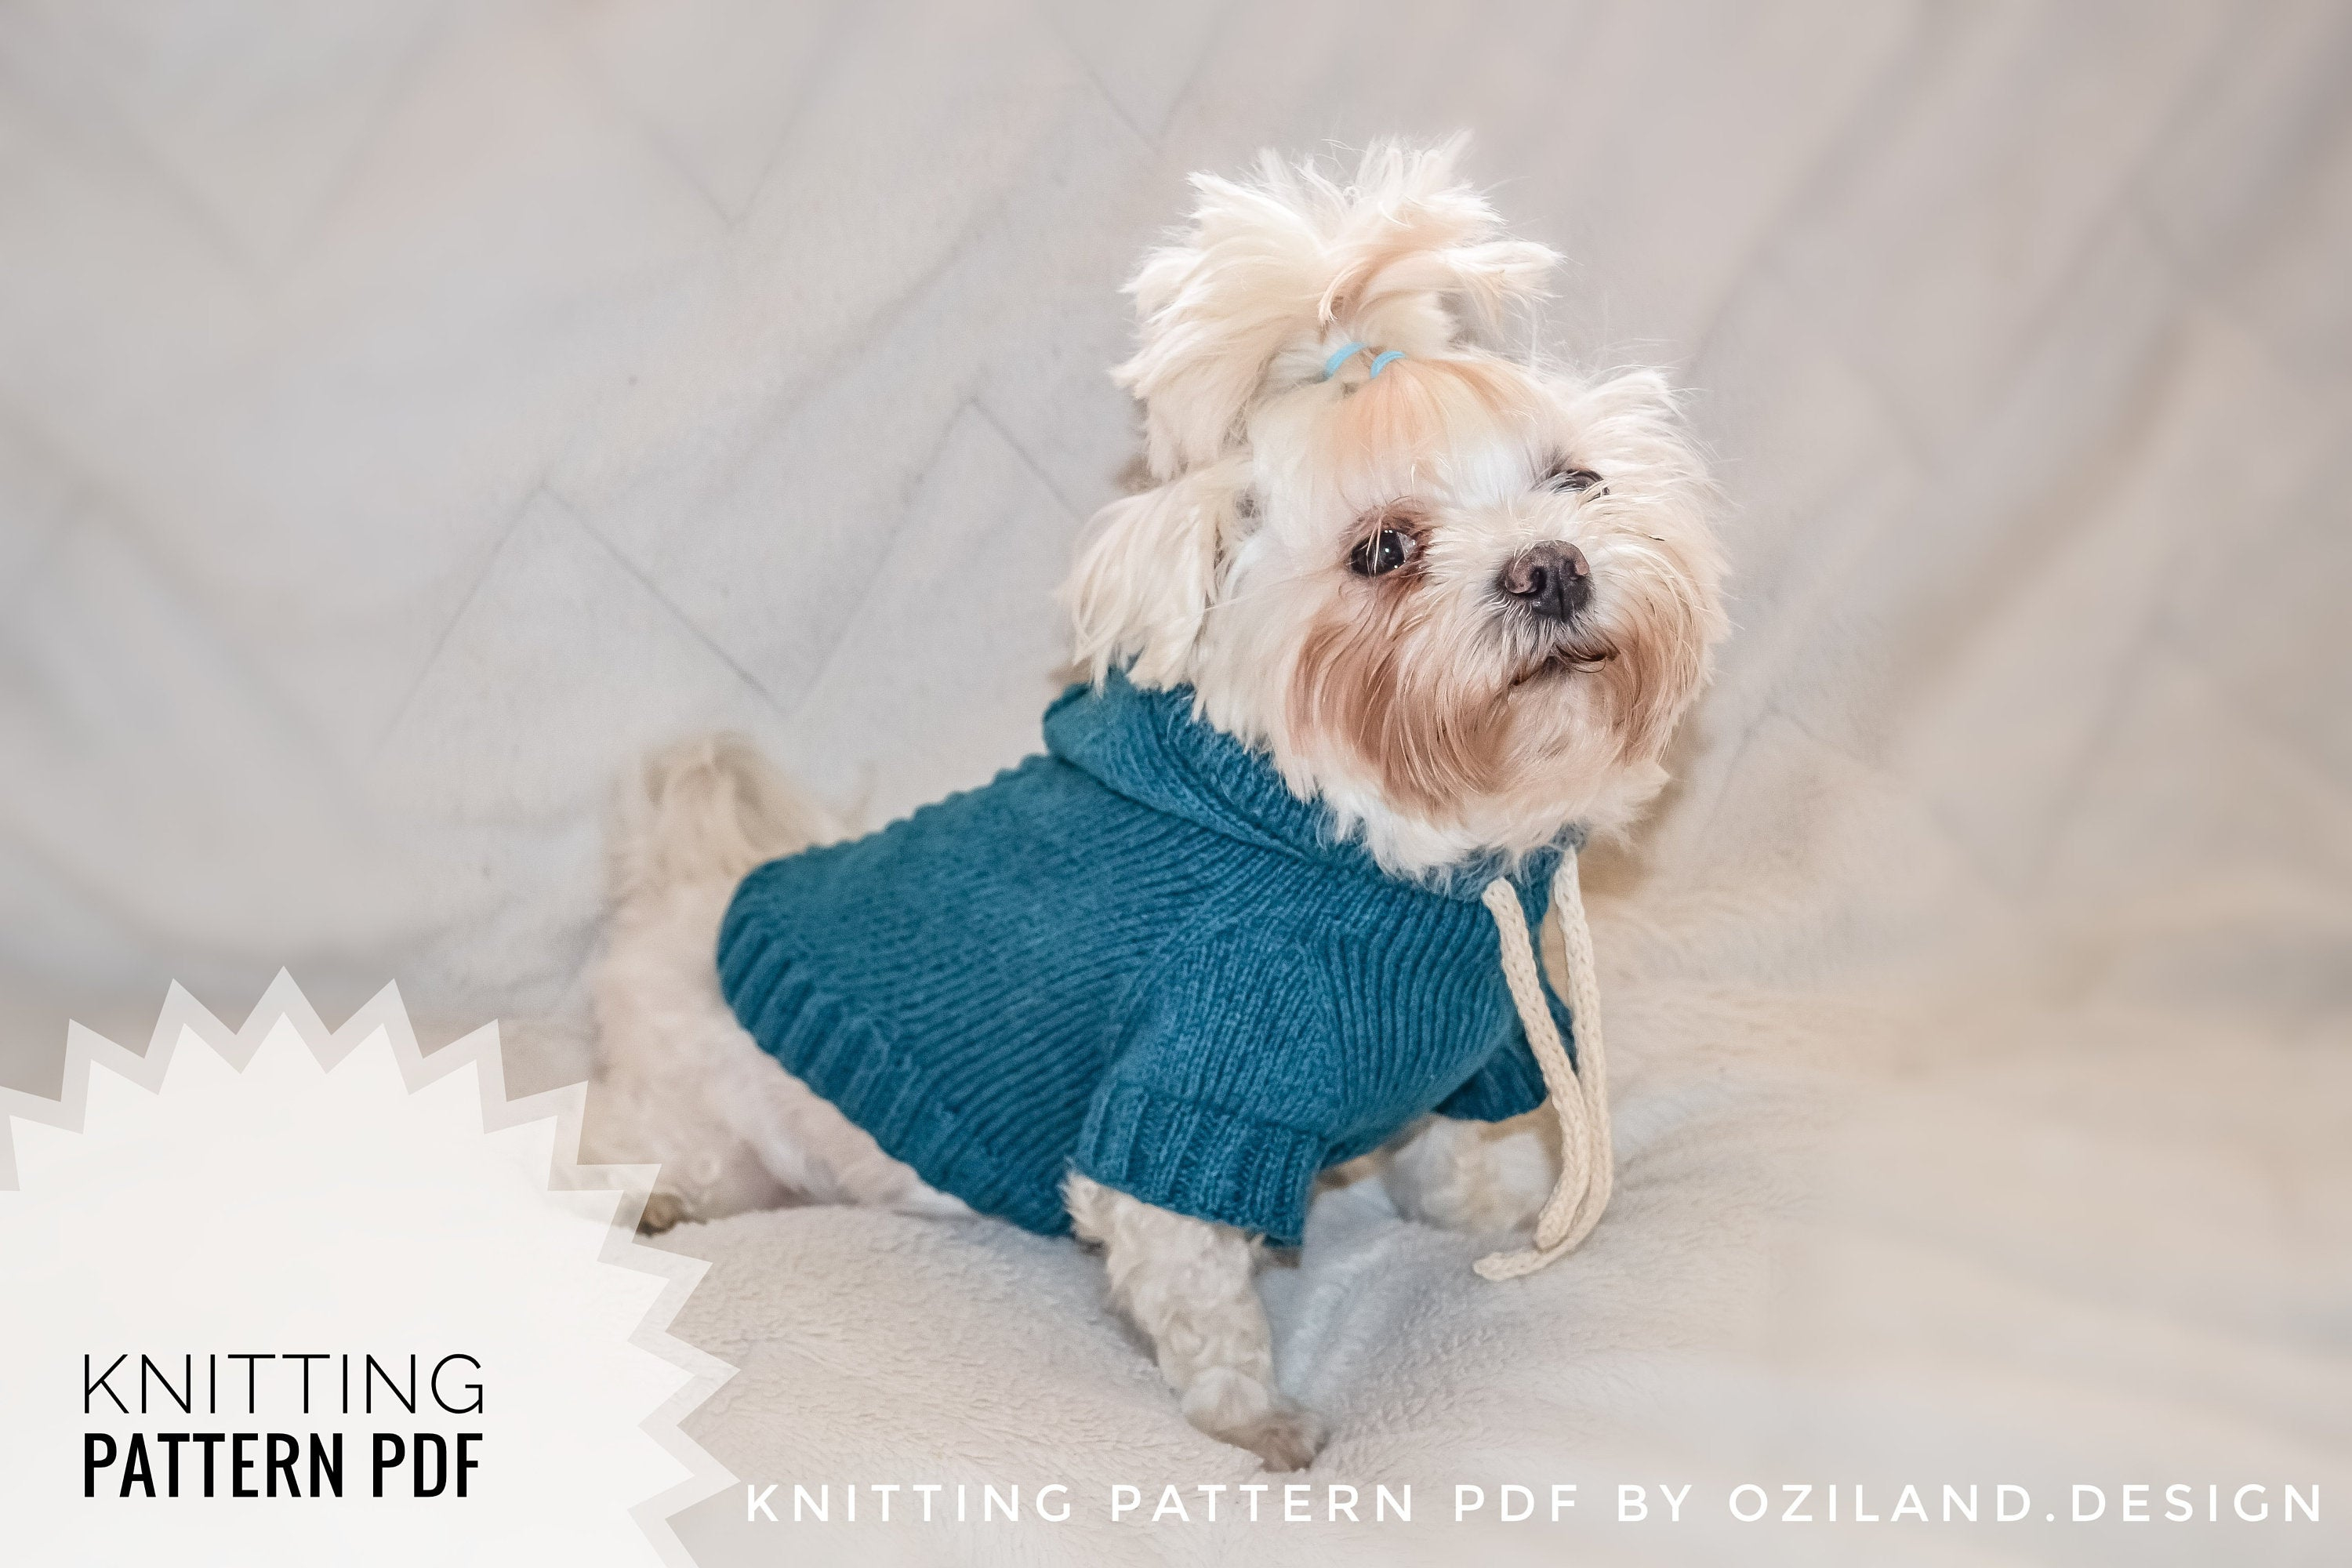 Small Dog Knitting Patterns Sport Hoodie For Small Dog Size L Knitting Pattern Diy Pdf